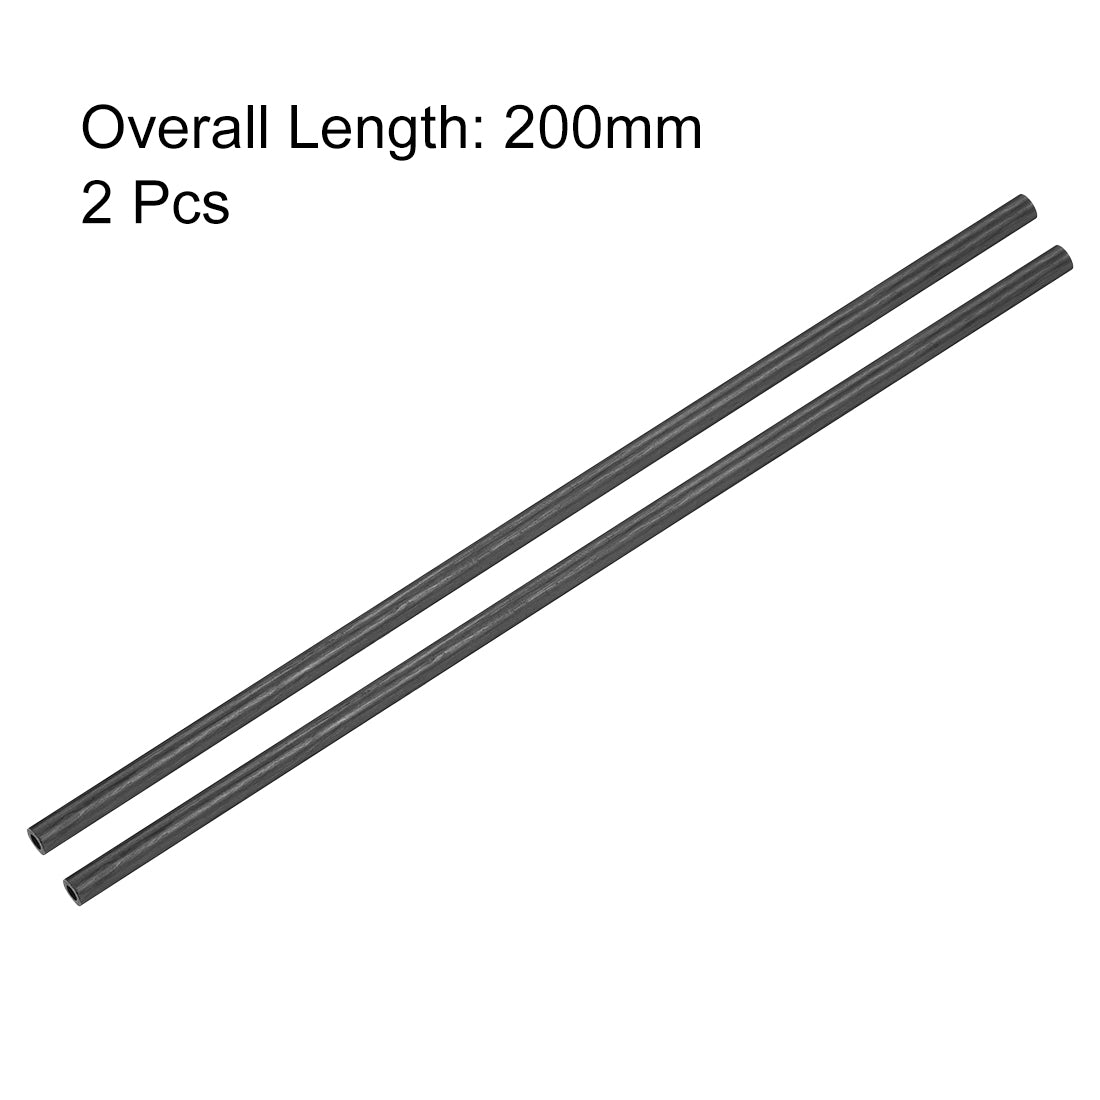 uxcell Uxcell Carbon Fiber Round Tube 5mm x 3mm x 400mm Carbon Fiber Wing Pultrusion Tubing for RC Airplane Quadcopter 2 Pcs